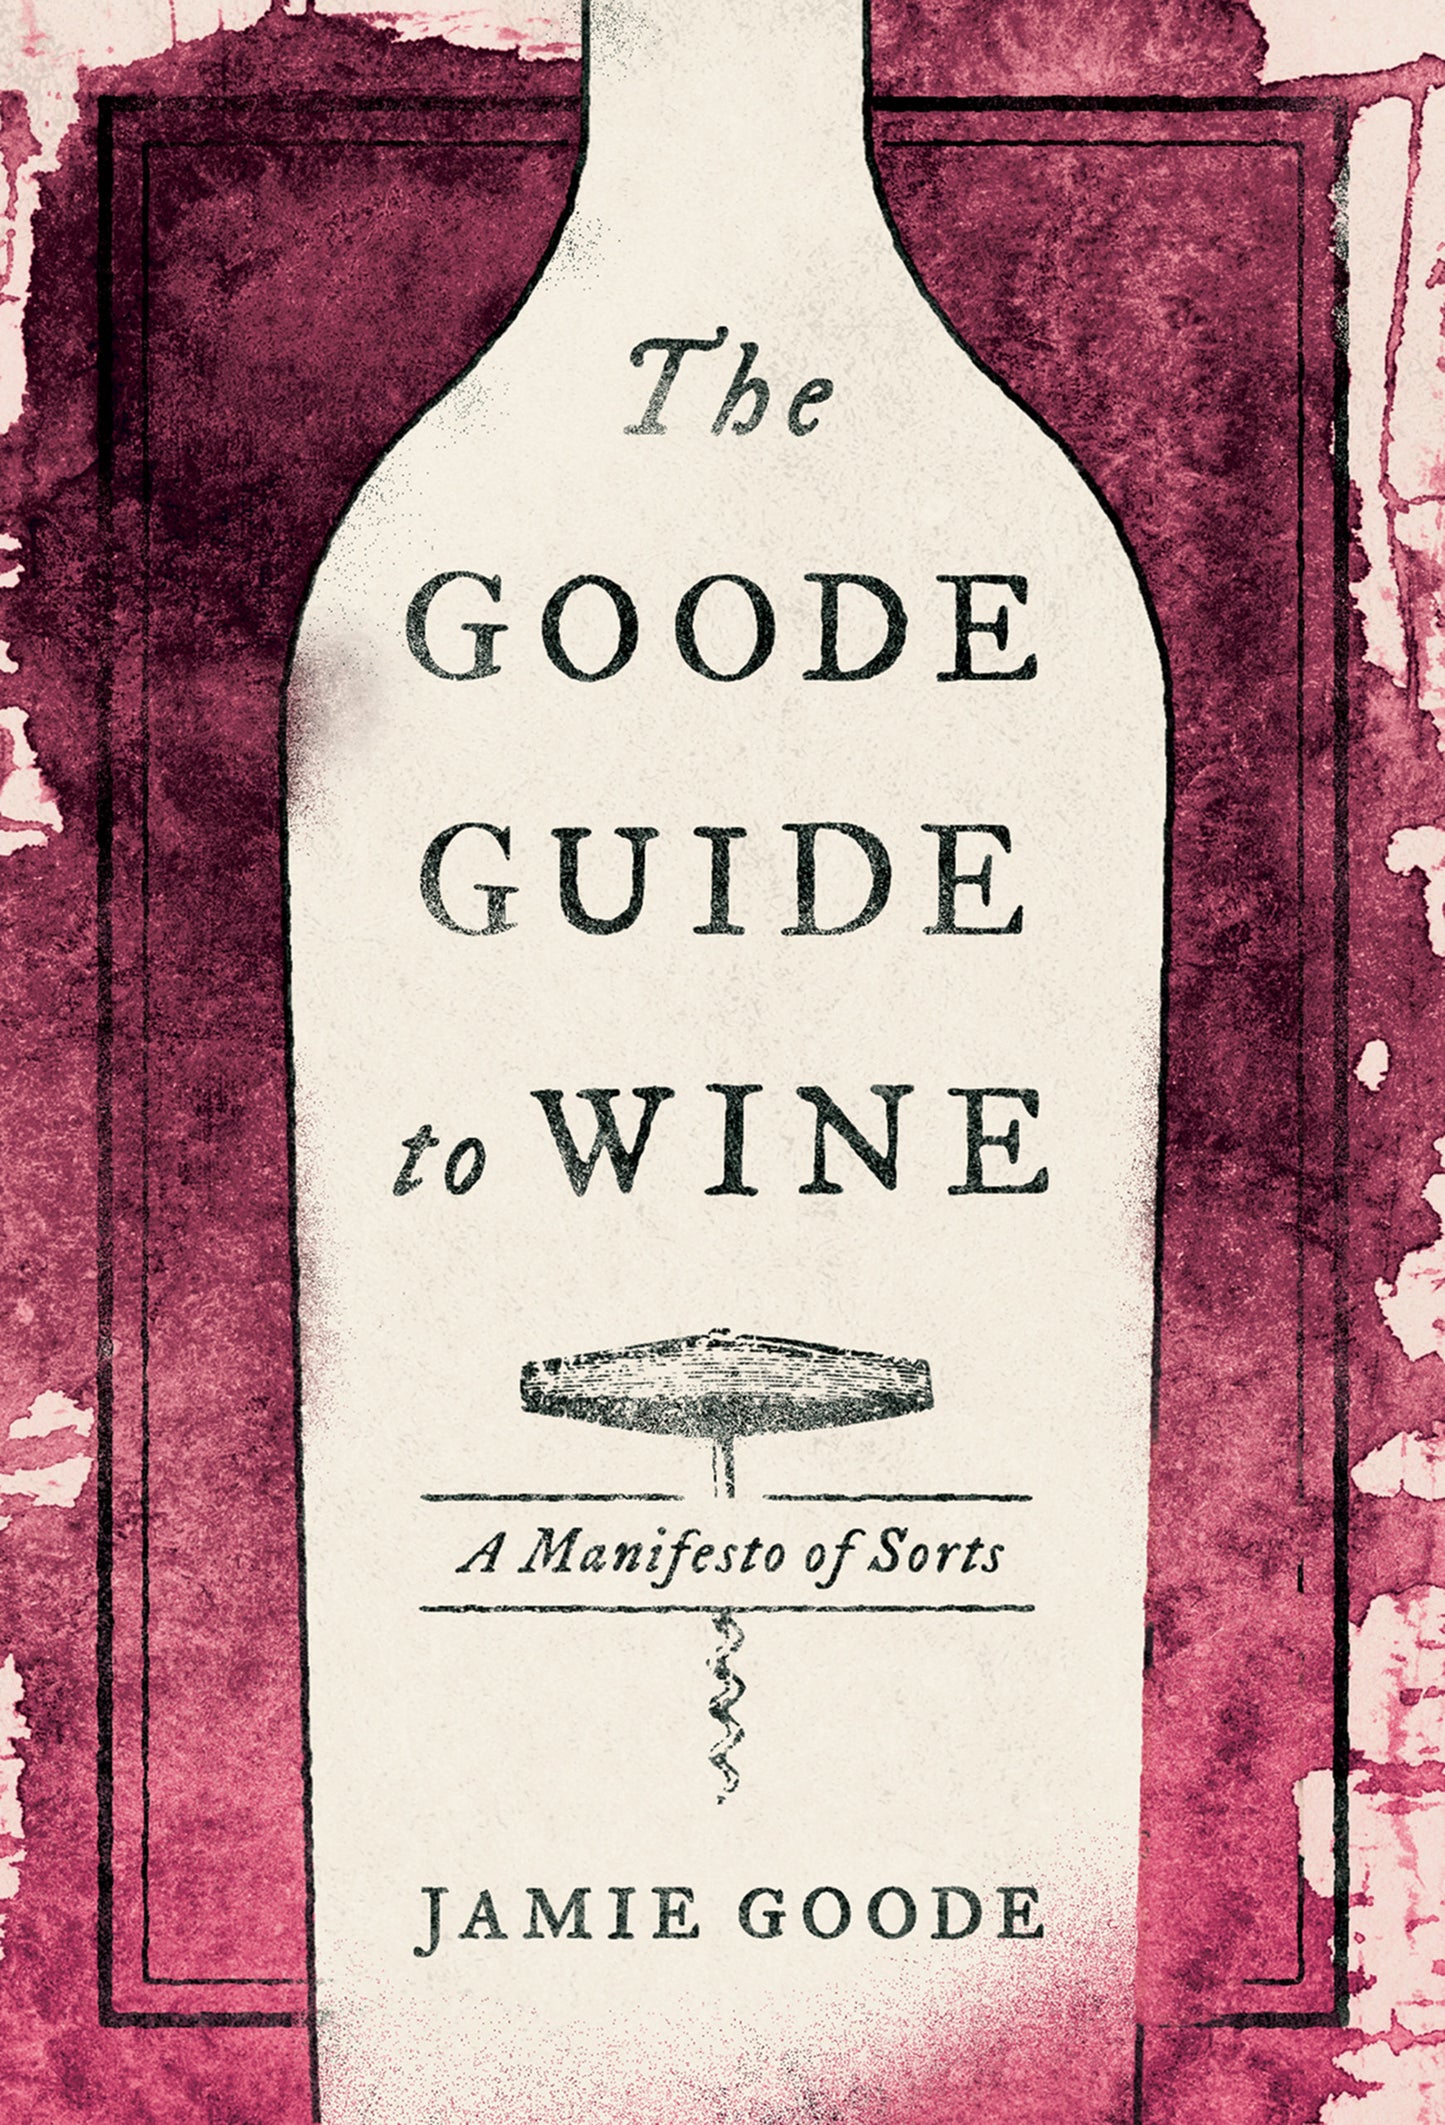 GOODE GUIDE TO WINE: A MANIFESTO OF SORTS